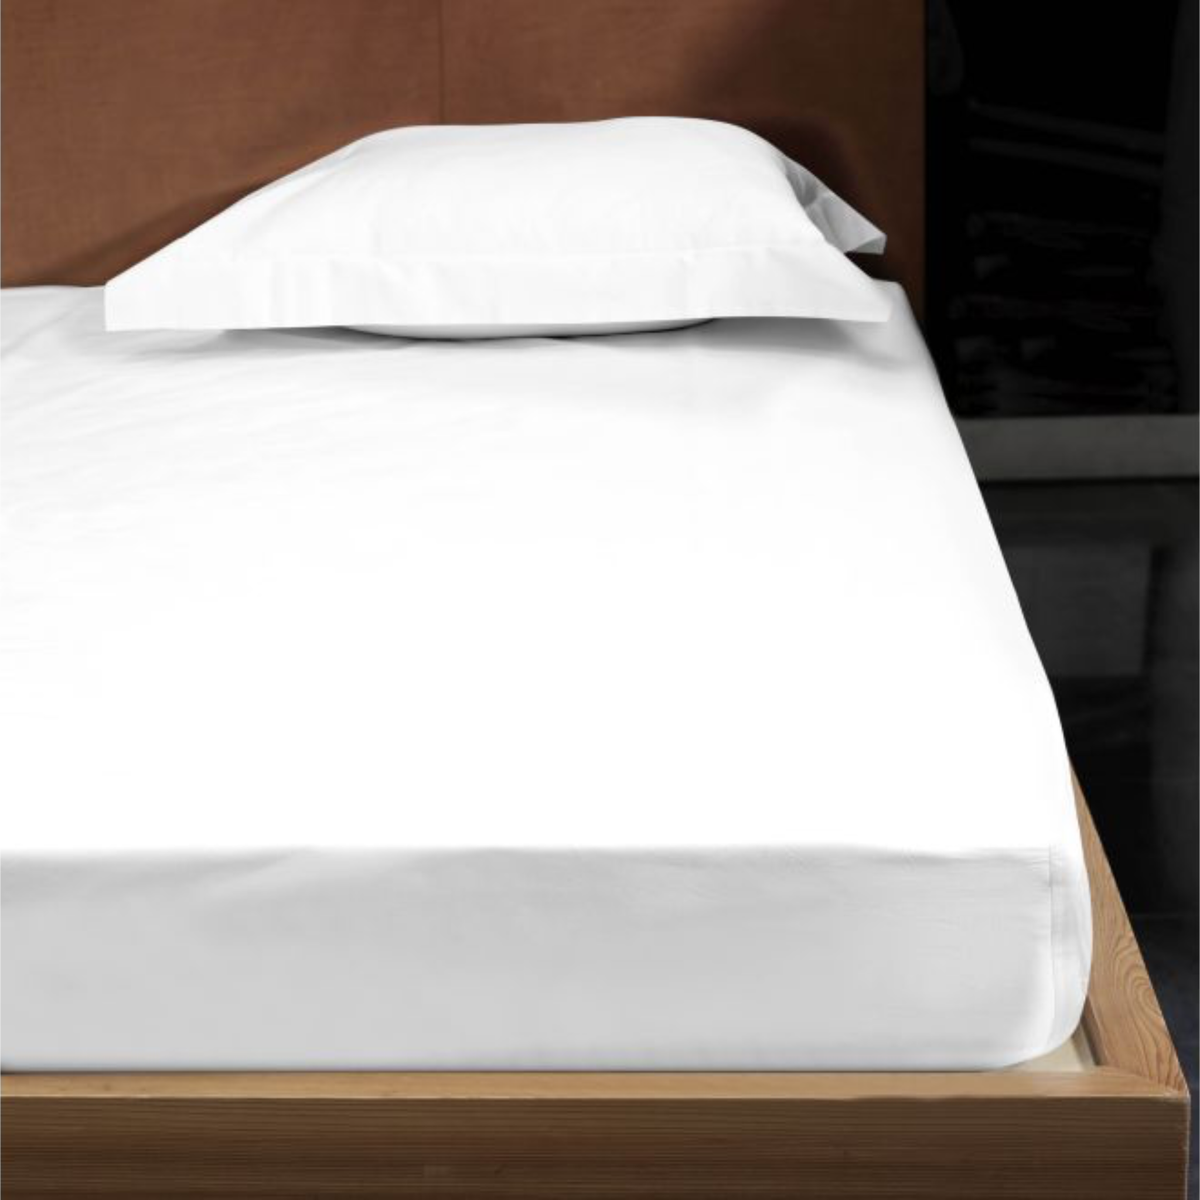 Fitted Bed Sheet of Signoria Gemma Bedding in White Color